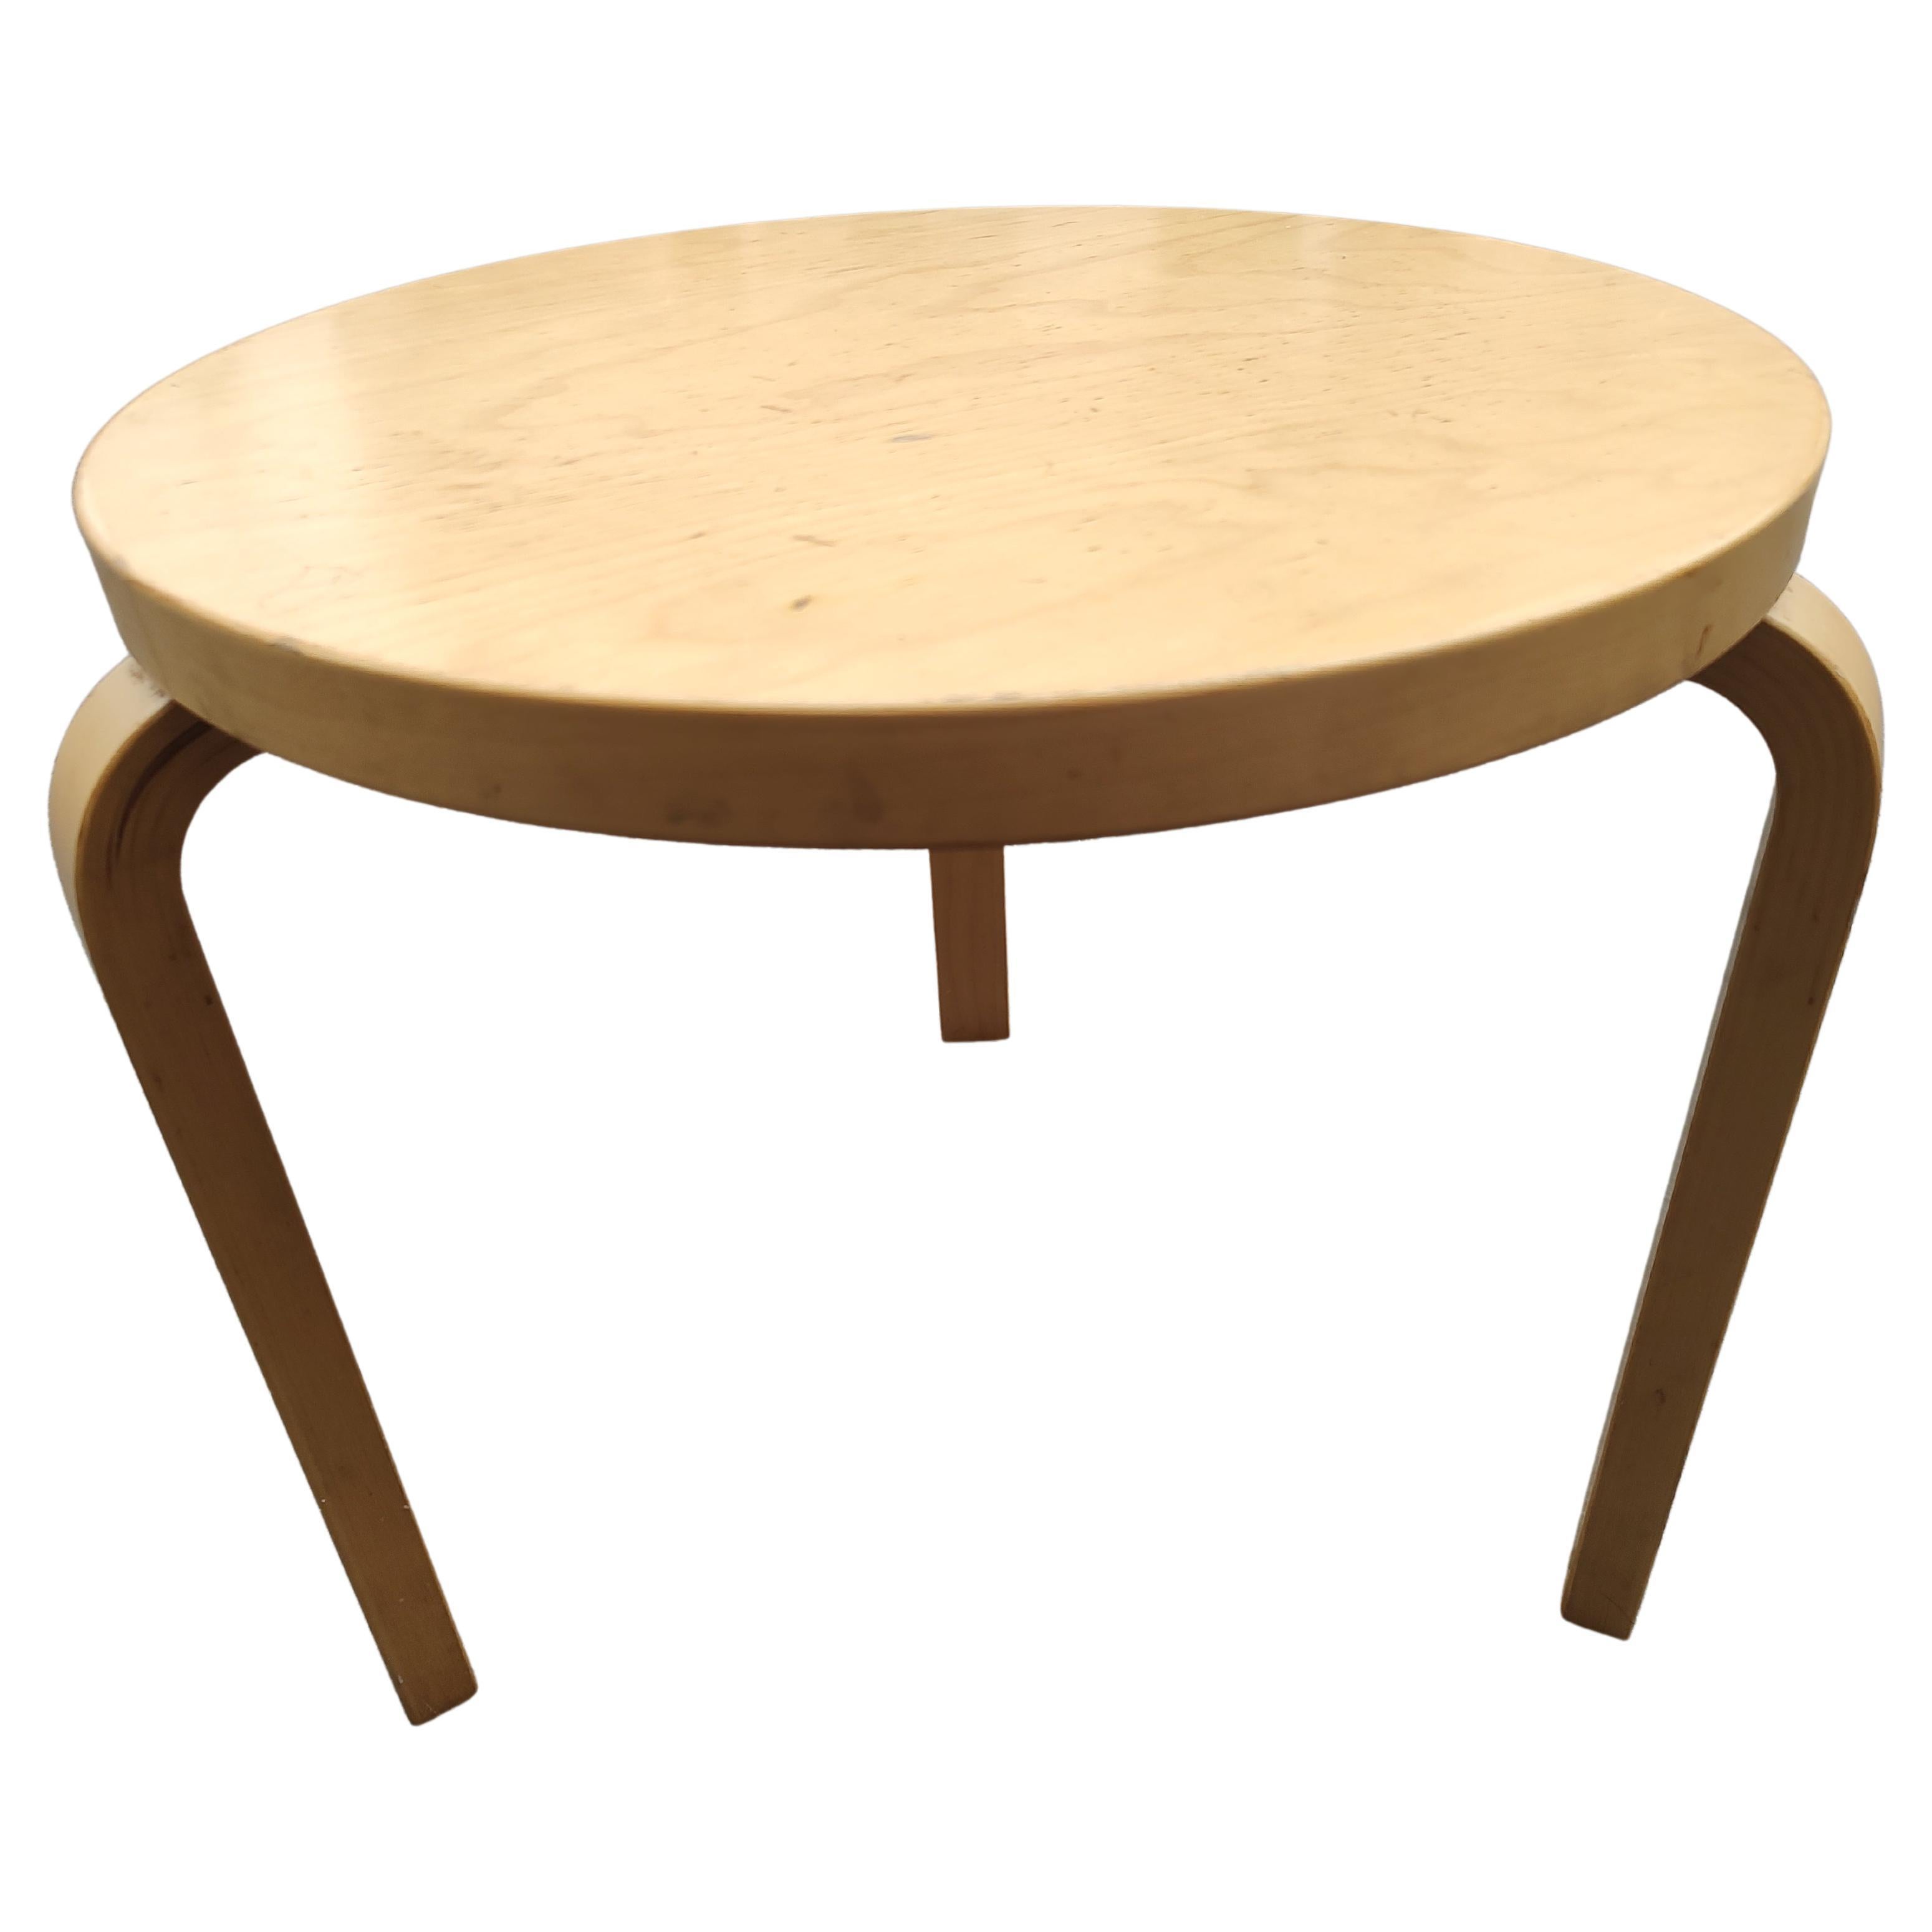 Mid Century Modern Sculptural Round with Bent Legs by Alvar Aalto for Artek In Good Condition For Sale In Port Jervis, NY